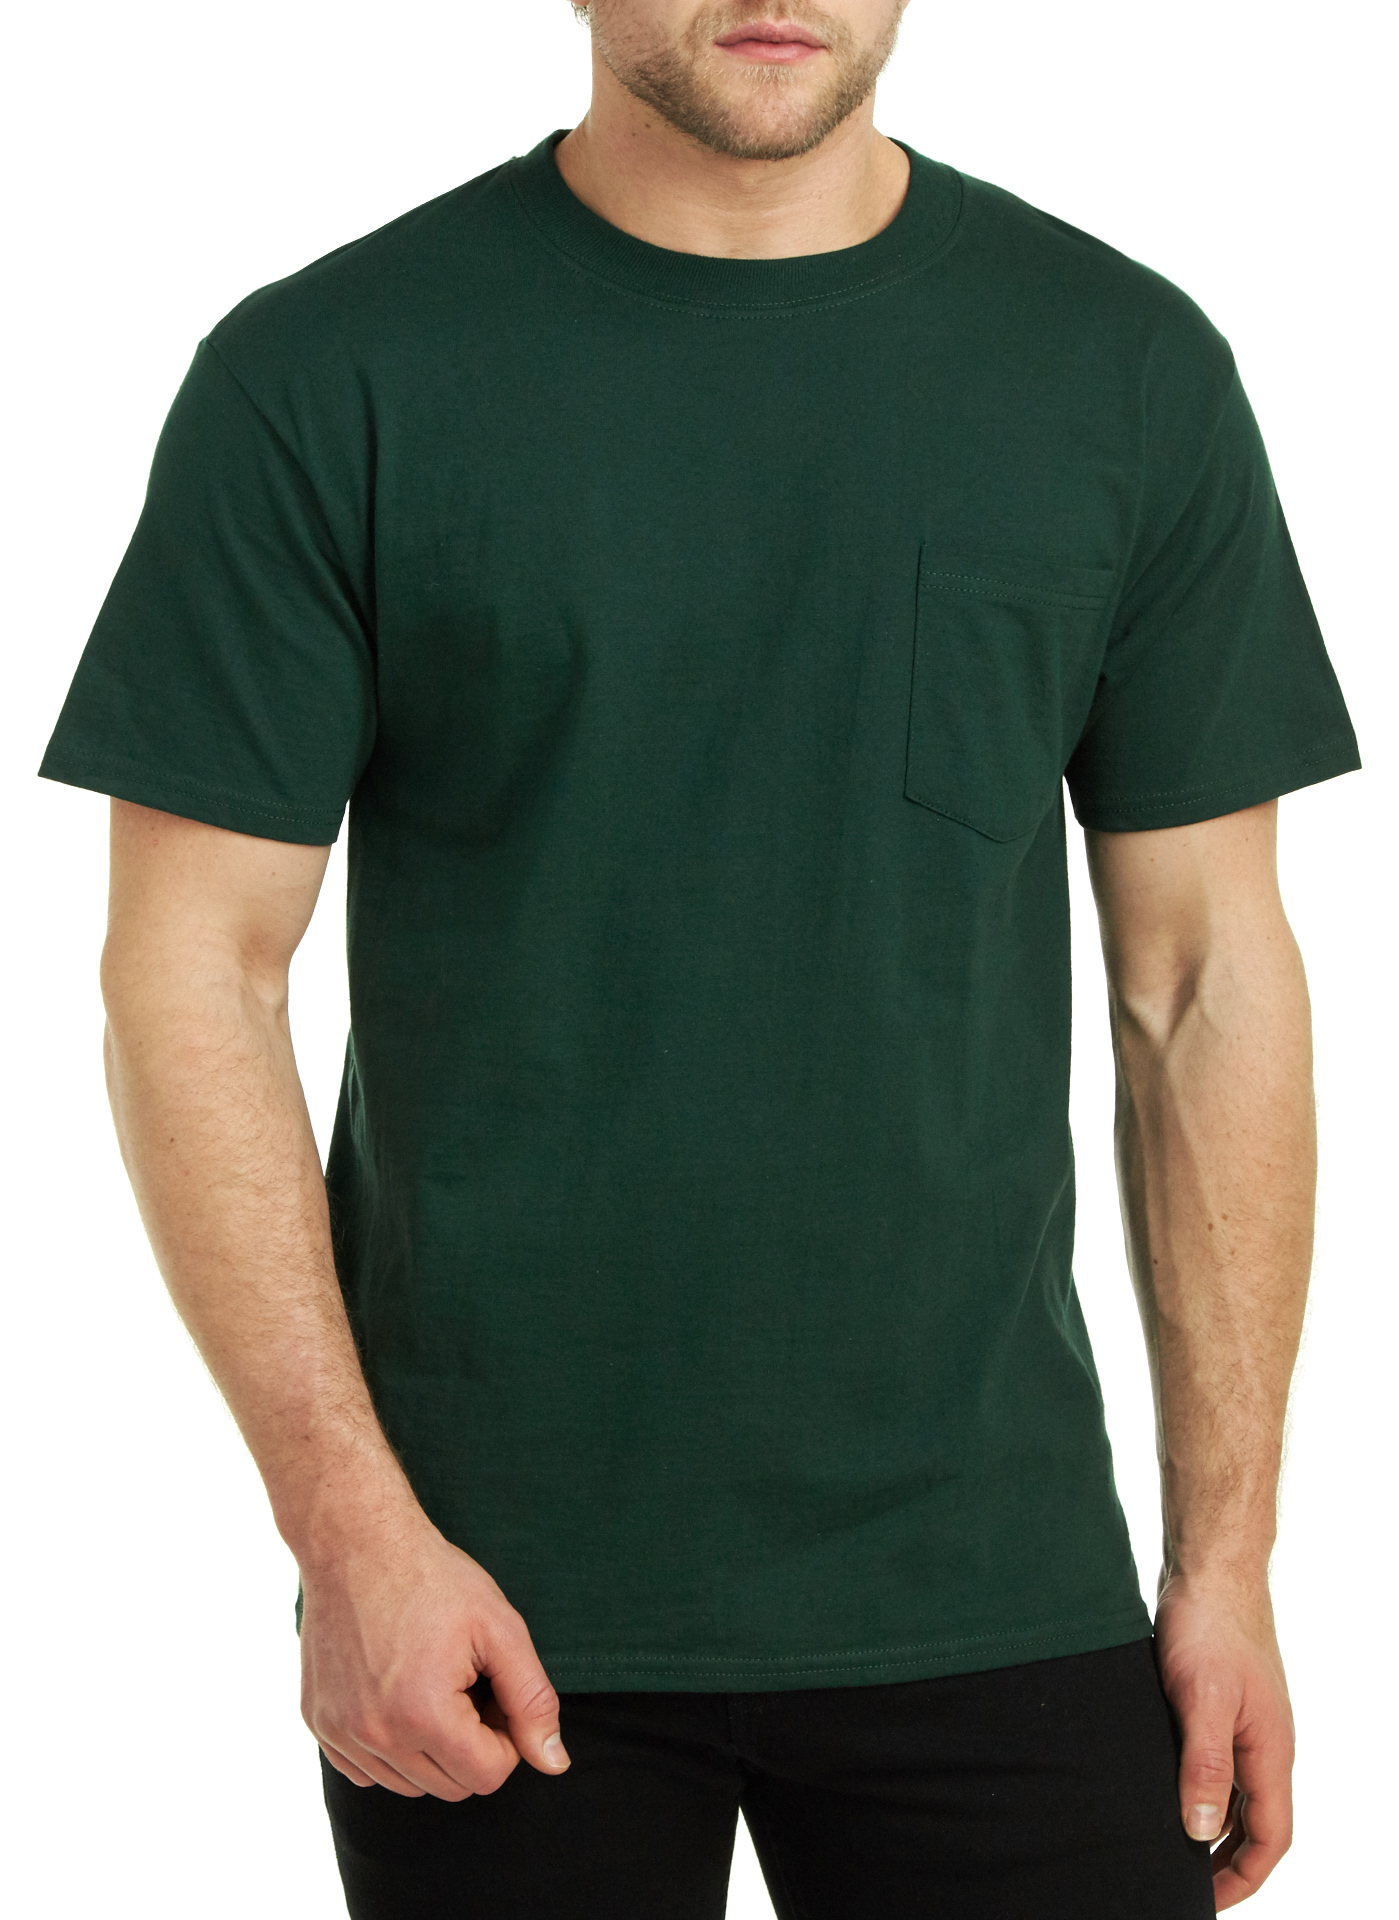 Hanes Mens Short Sleeve Beefy-T 100% Cotton Crew Neck T-Shirt with Pocket 5190